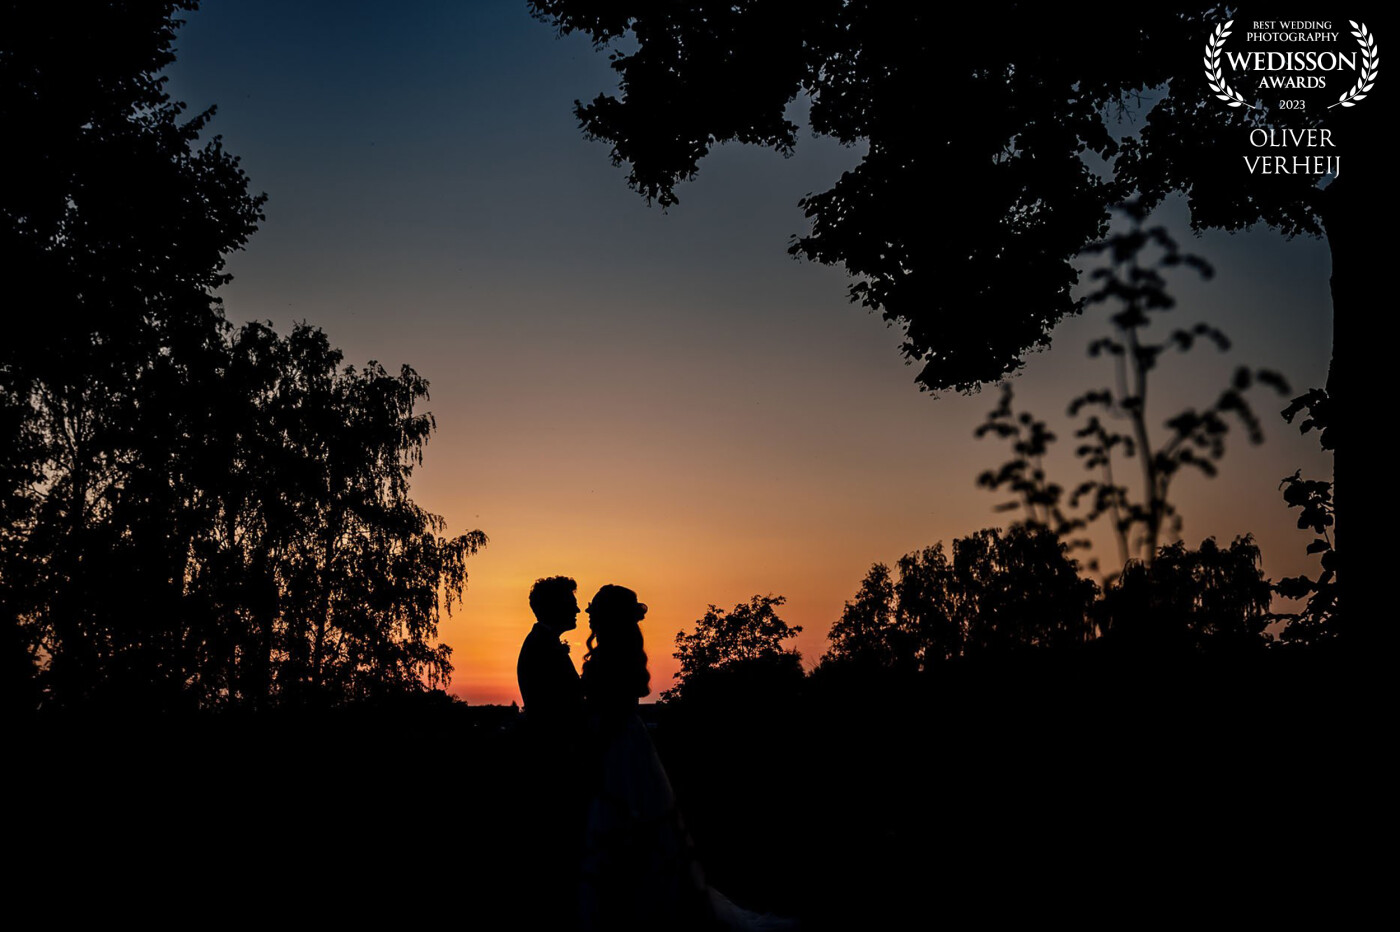 A lovely couple during twilight. I always try to take the bride and groom for a wallk during the golden hour to make a silhouette photo. Not only are the photos fantastic, it's always nice to have an intimite moment together during an otherwise busy day.